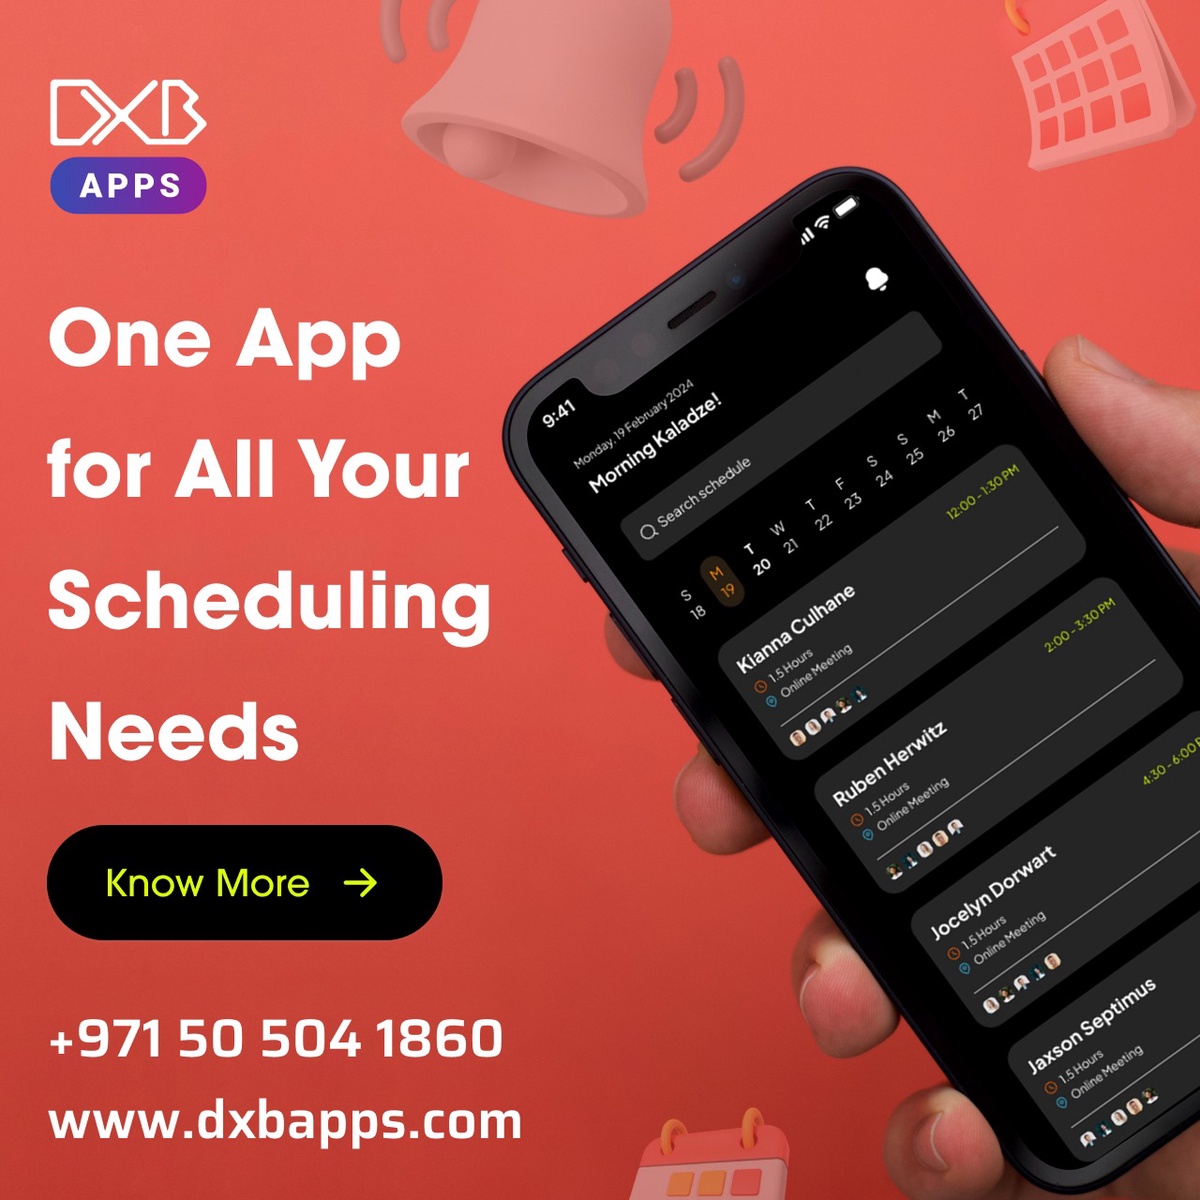 Improve Mobile Experiences with DXB APPs #1 Mobile Apps Development Company